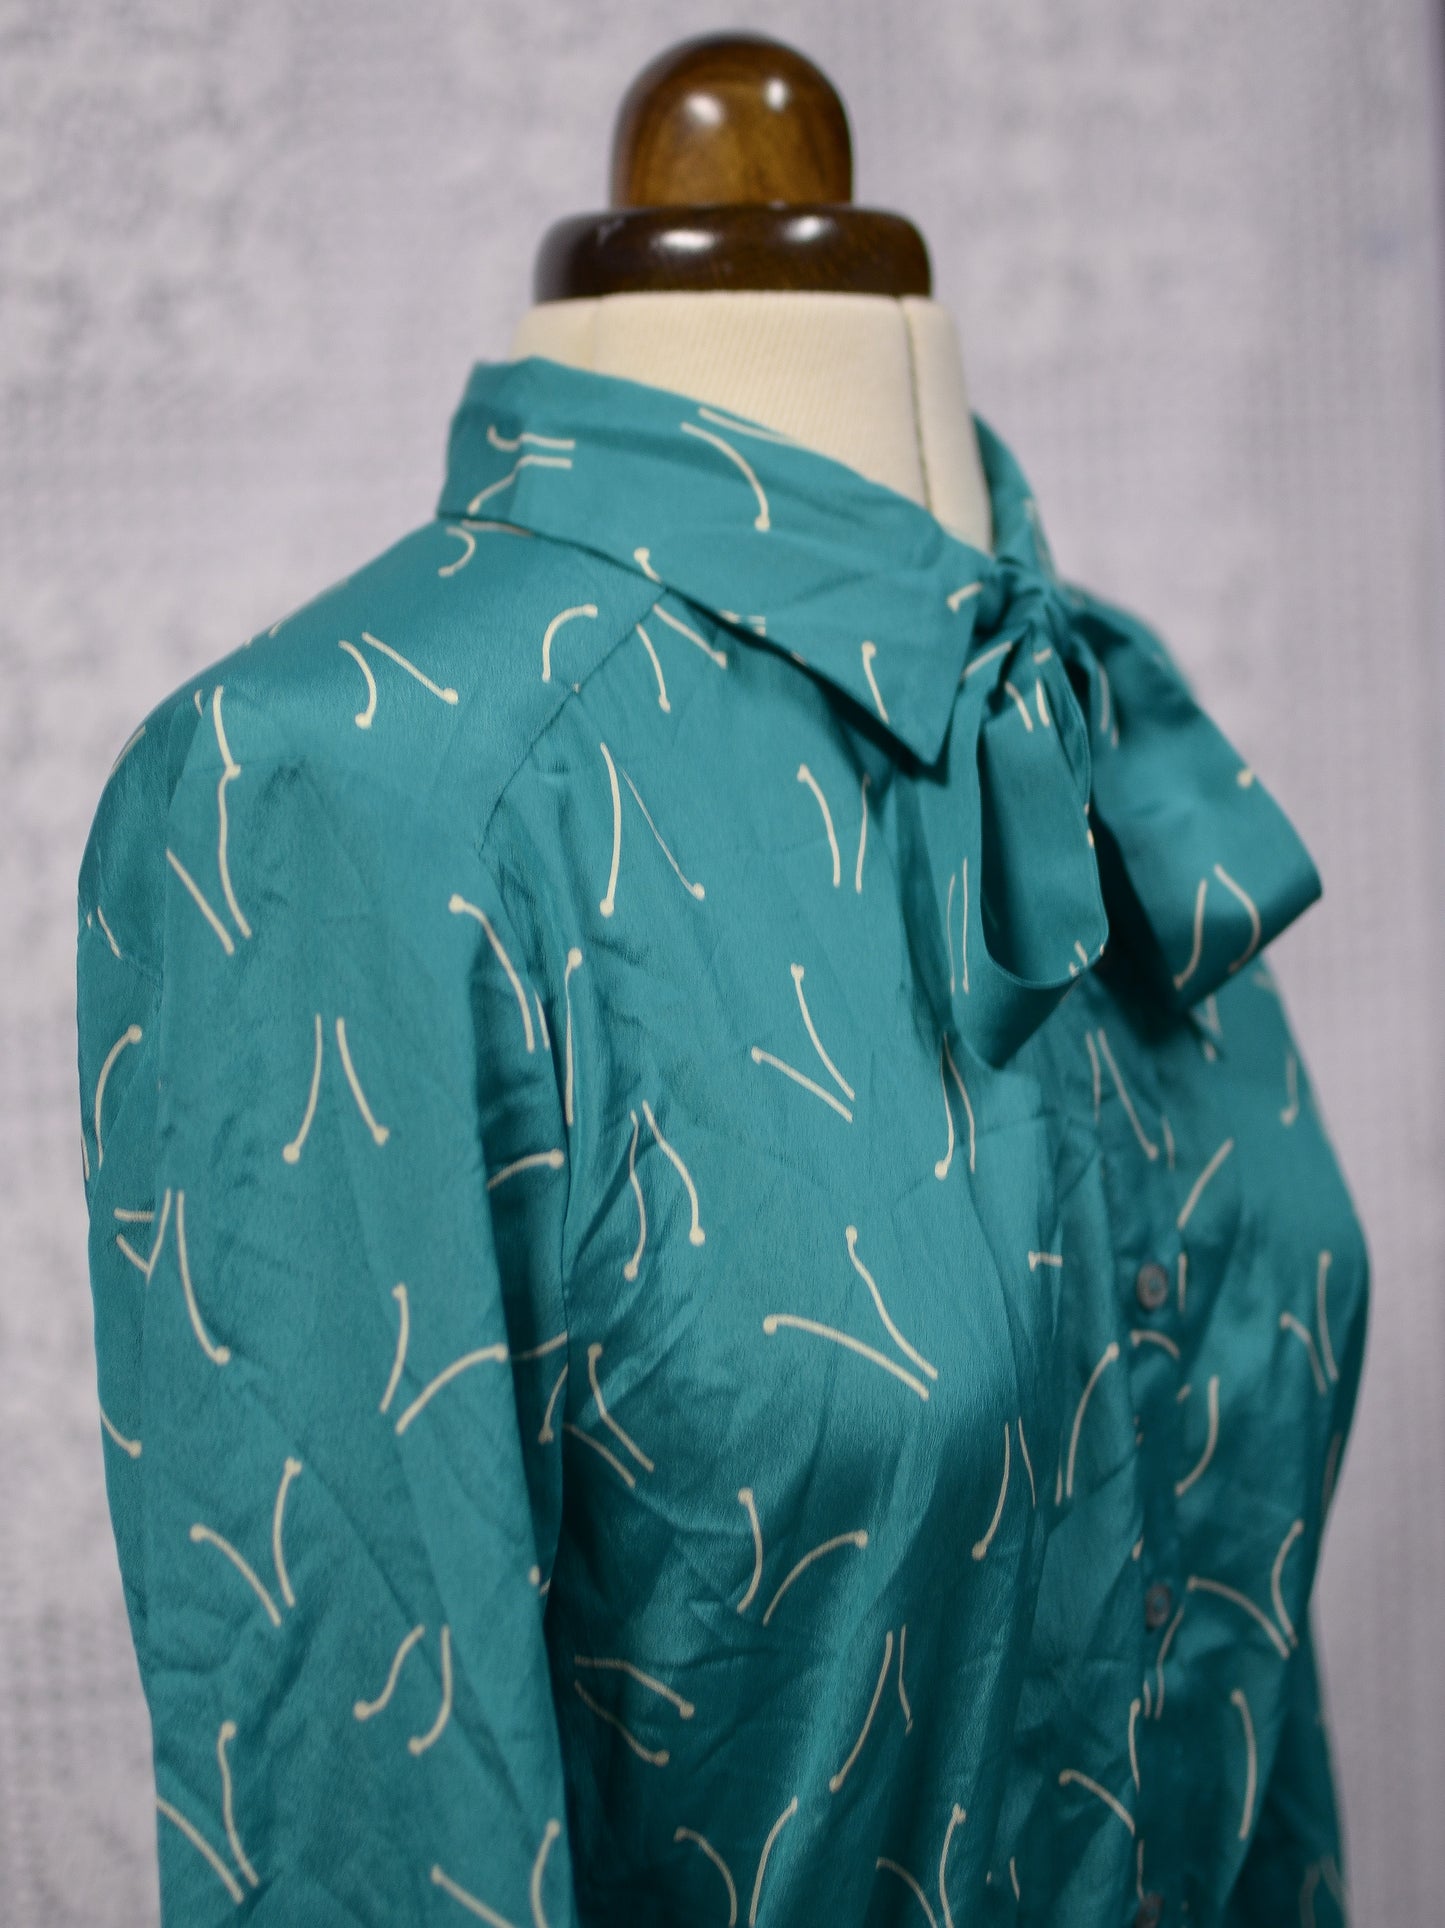 1970s turquoise green and white patterned shirt midi dress with matching bow tie and belt